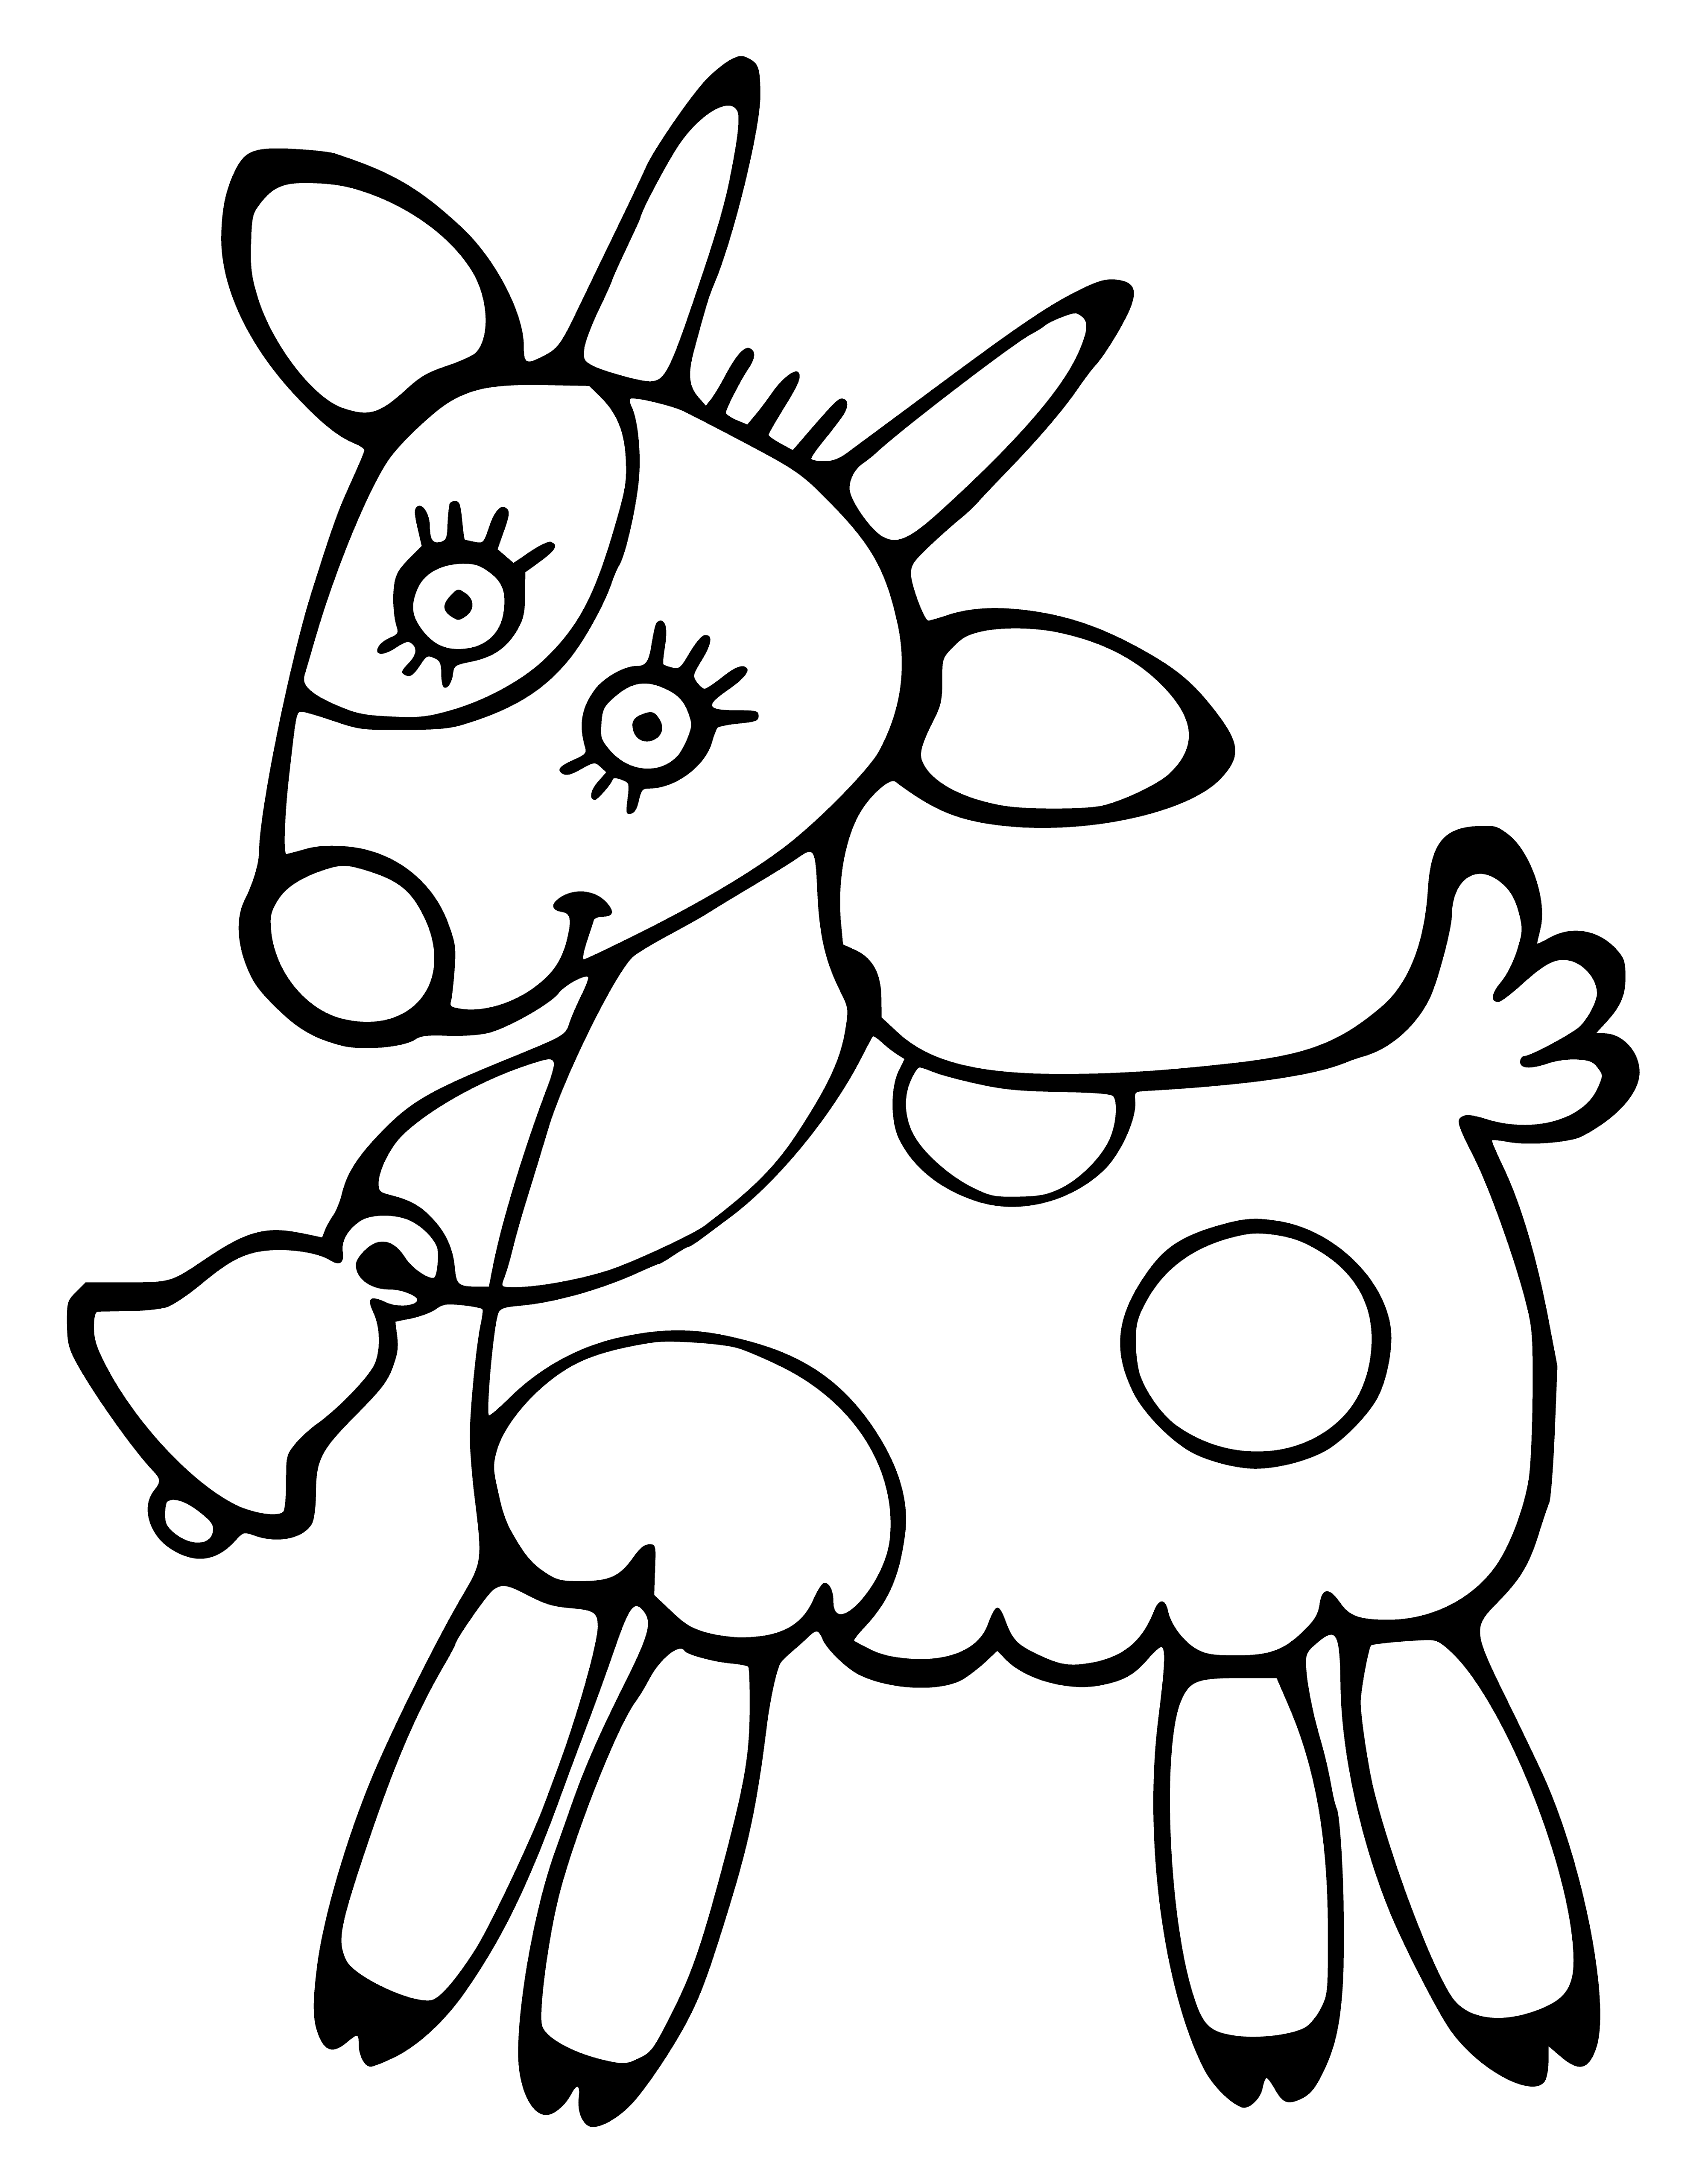 coloring page: Goat is a furry four-legged mammal with white & black fur, horns, & a beard. #Goat